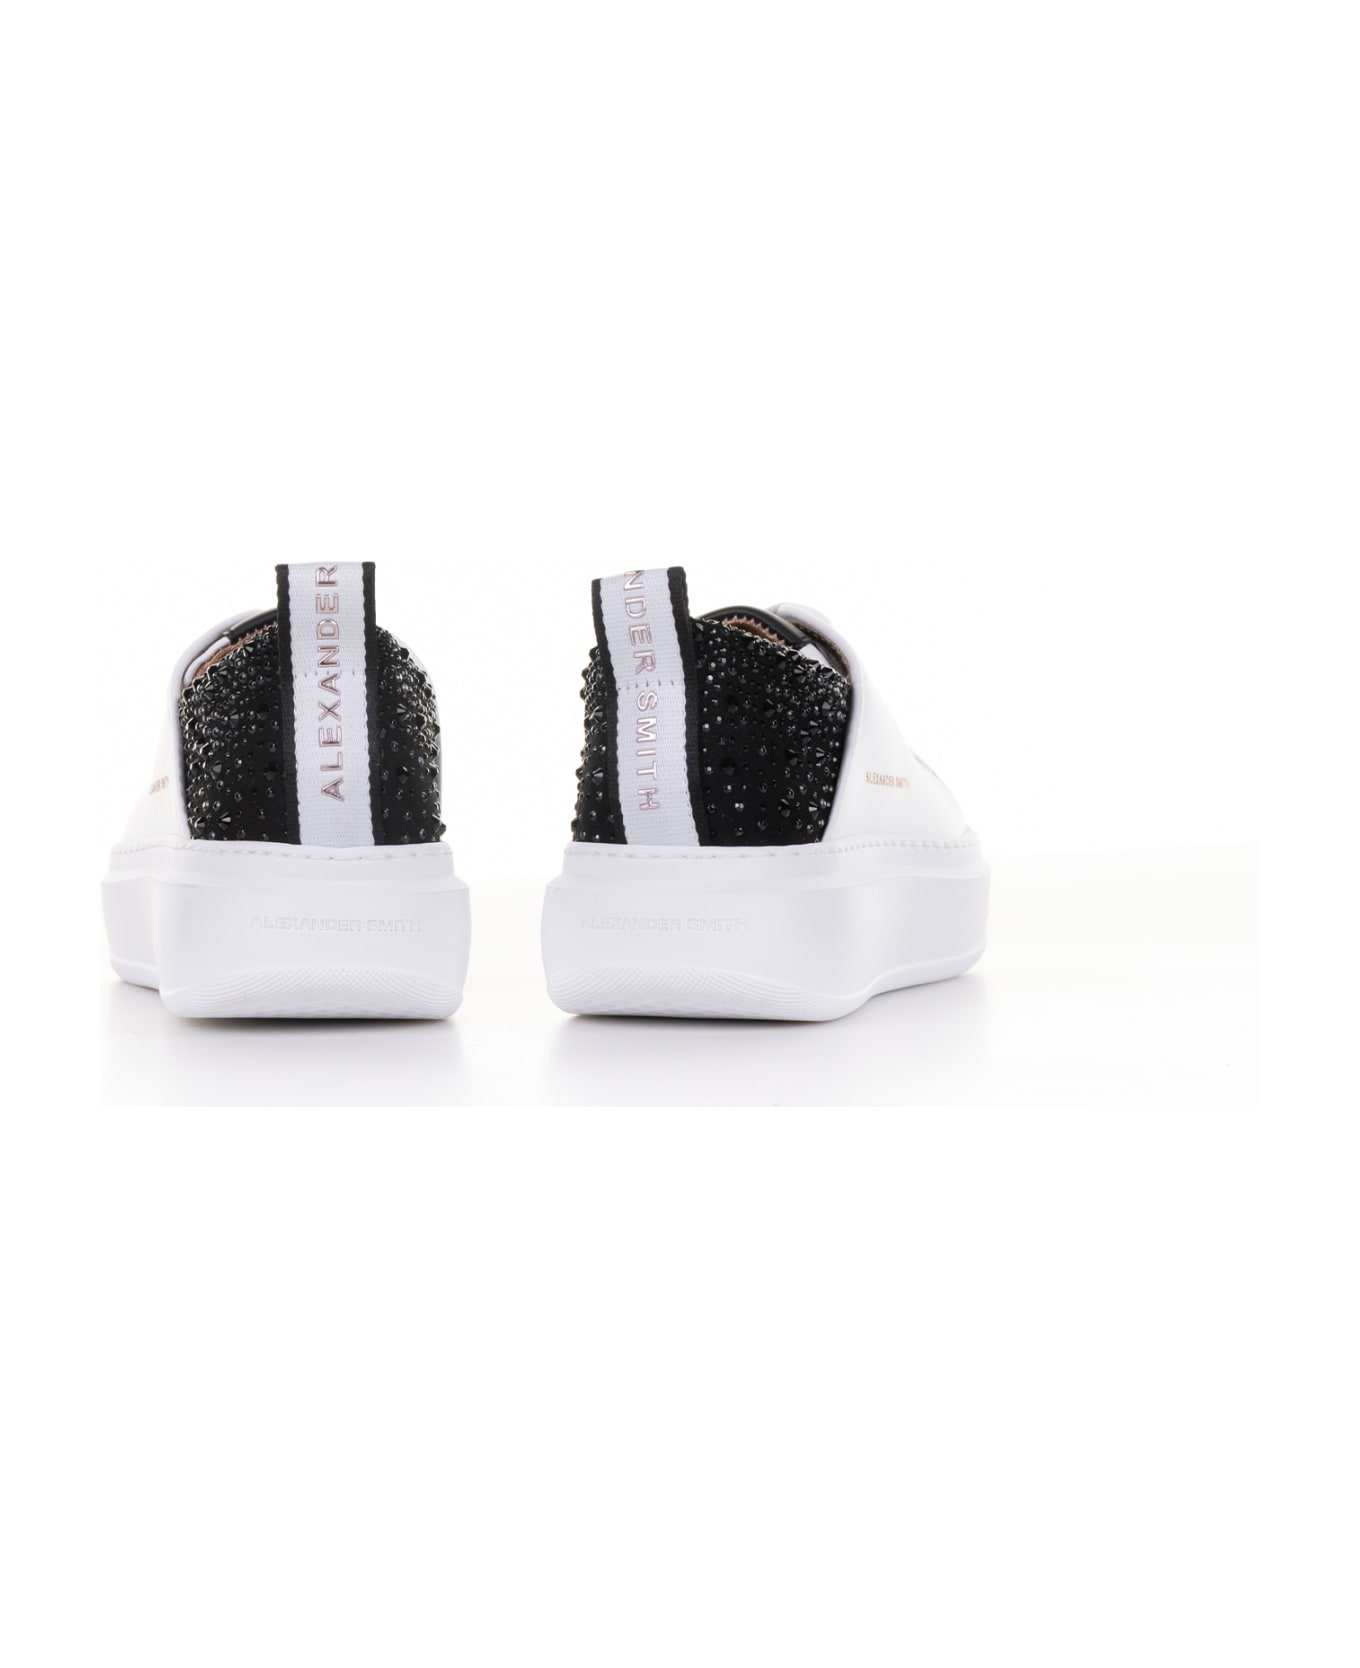 Alexander Smith London Wembley Sneaker In Leather And Rhinestones - WHITE BLACK